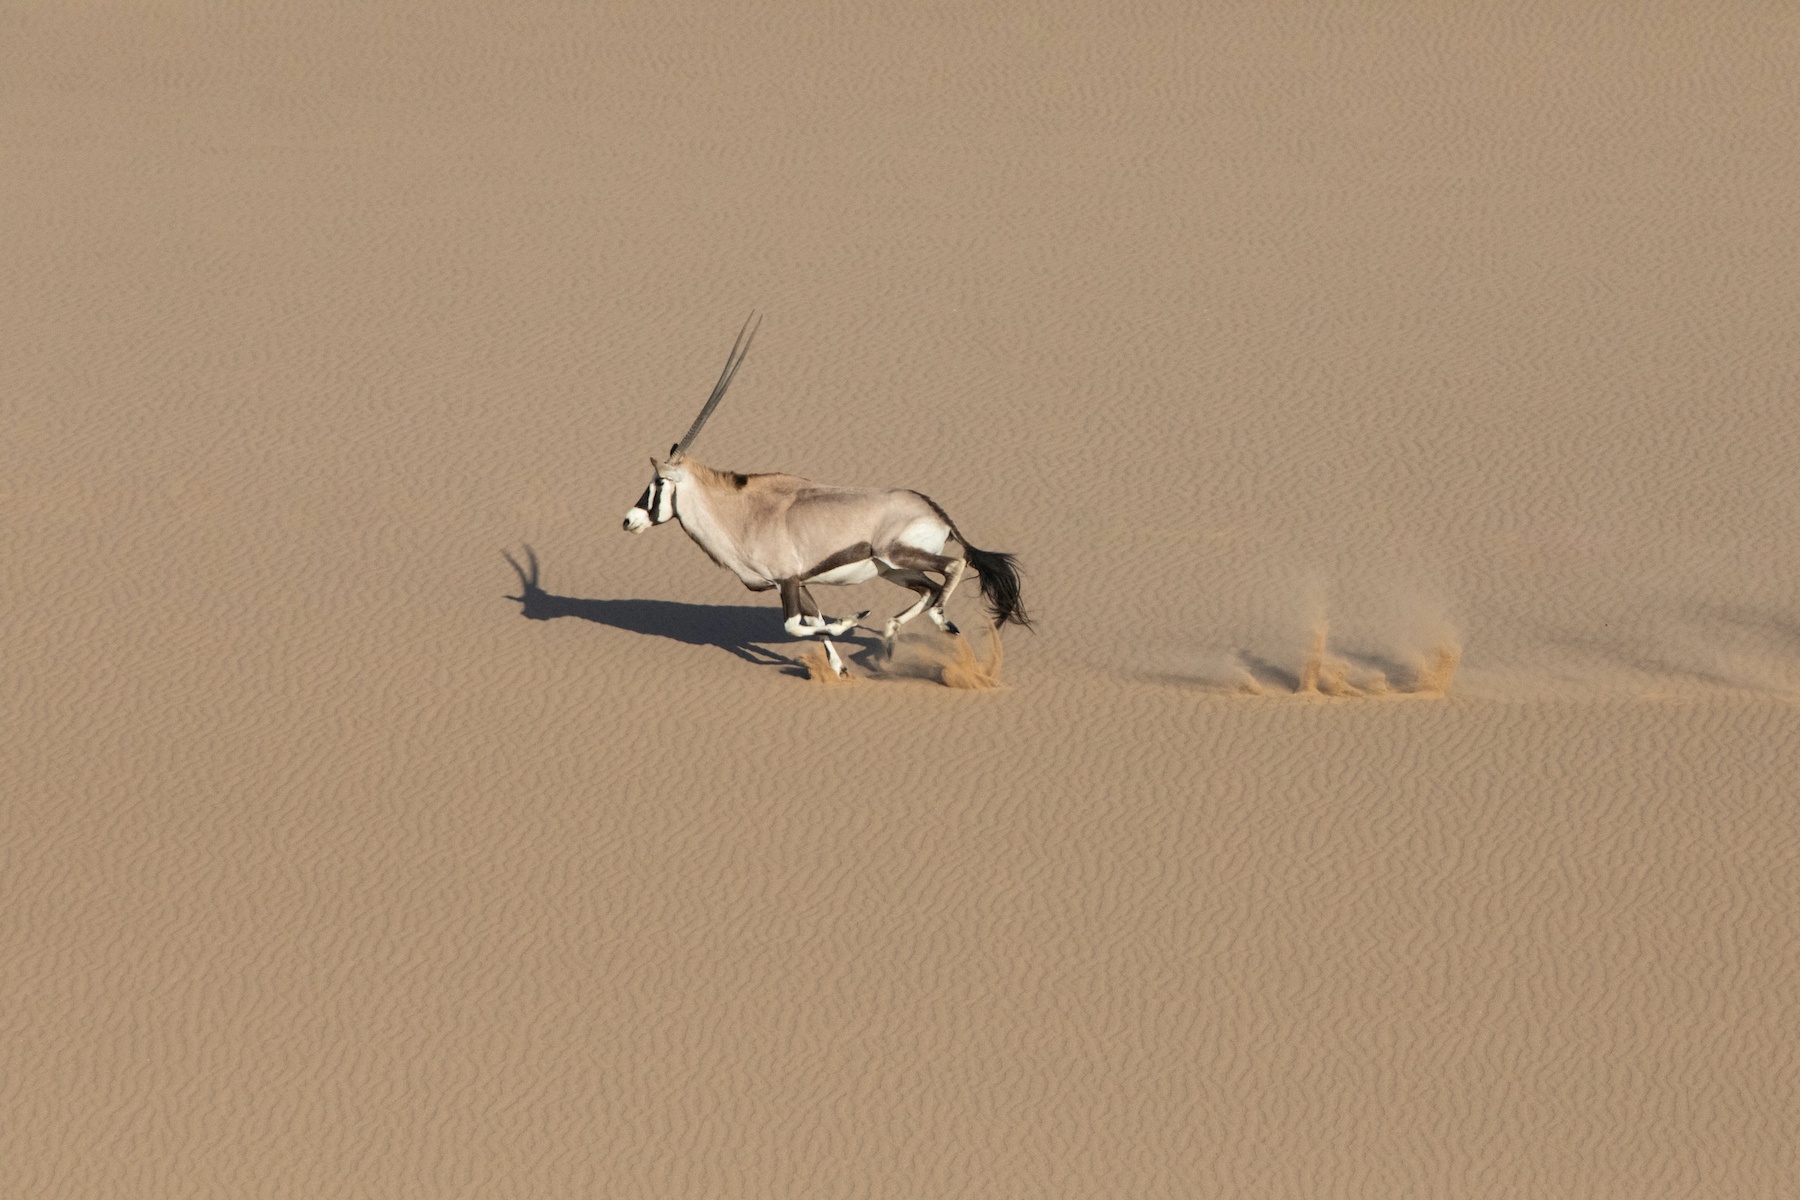 Oryx running on the dunes at Sandwich Harbour during our wildlife photography tour of Namibia